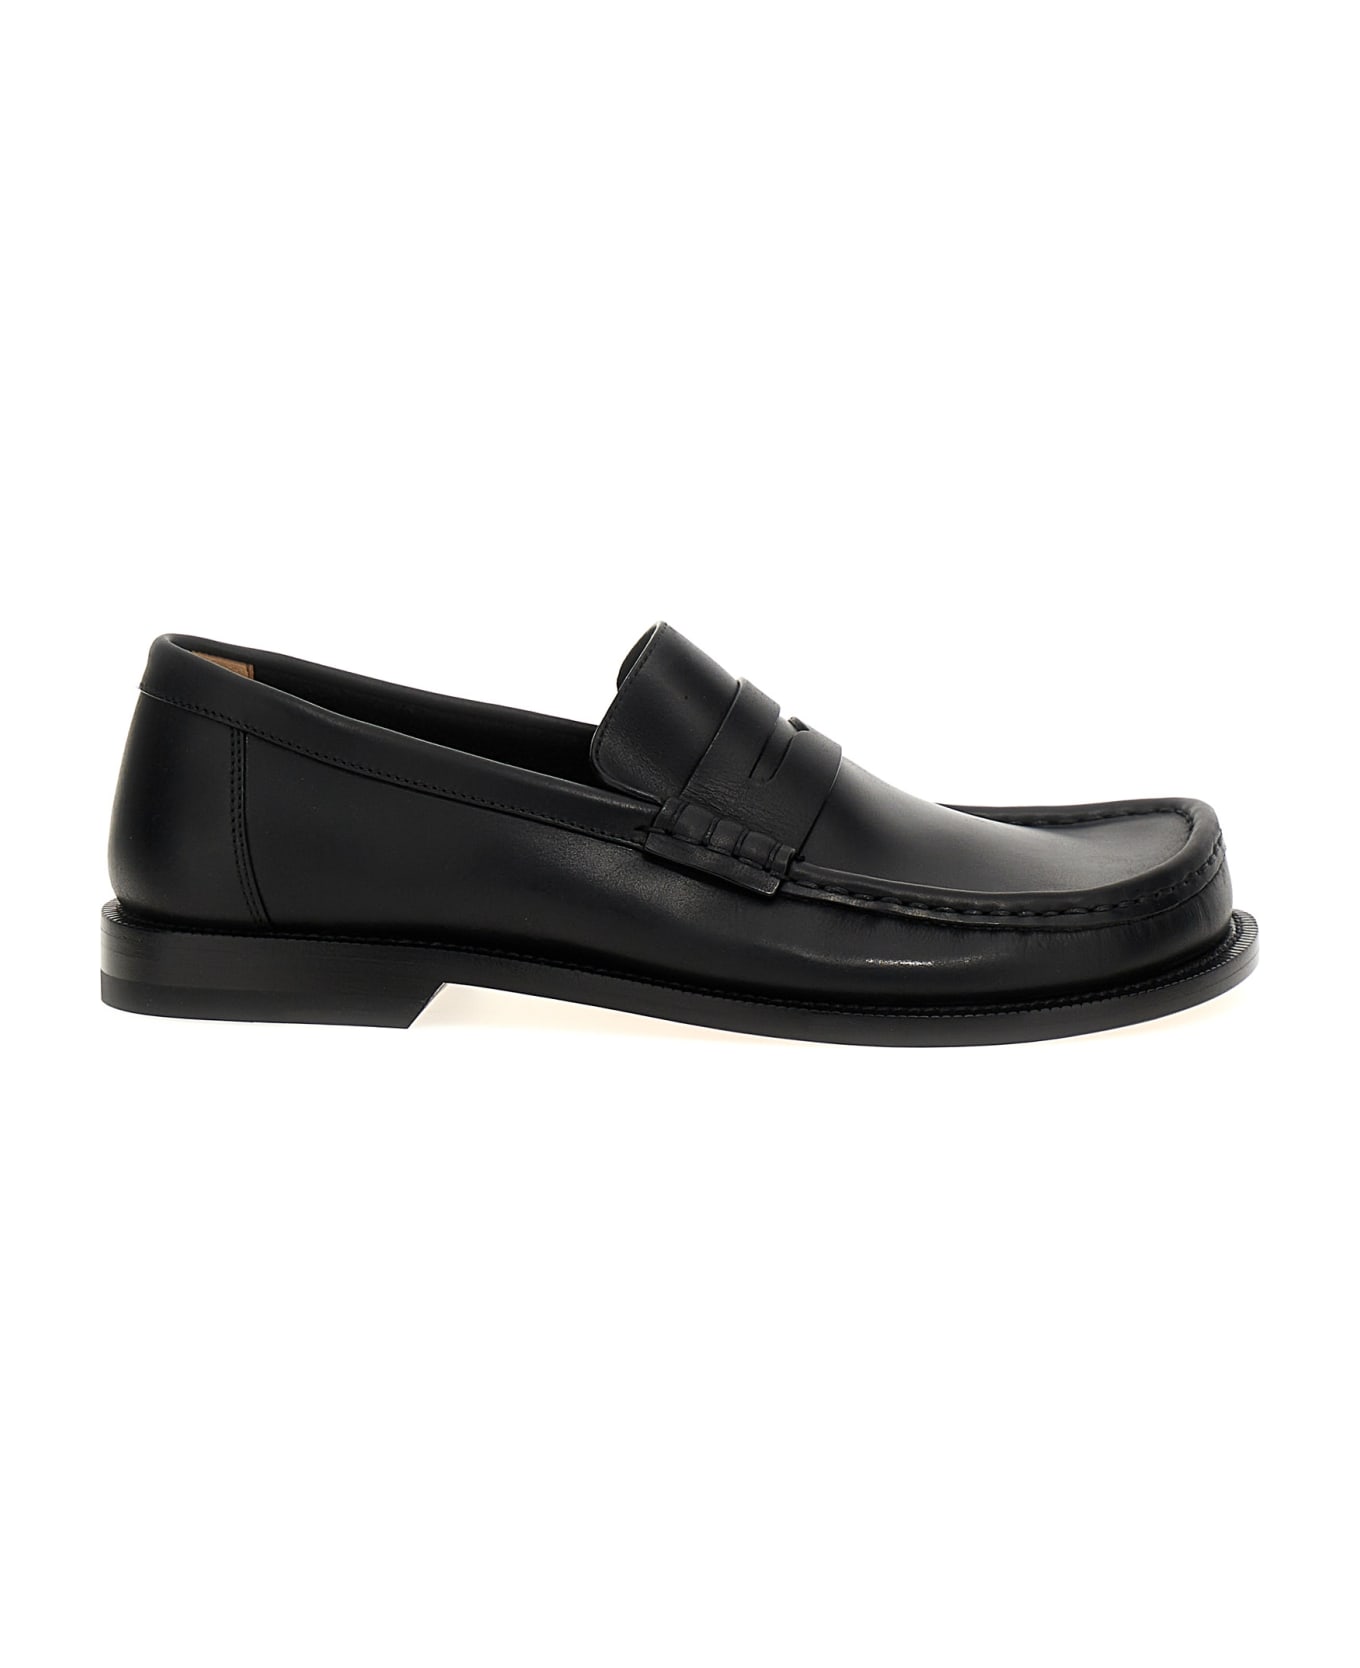 Loewe 'campo' Loafers - Black  